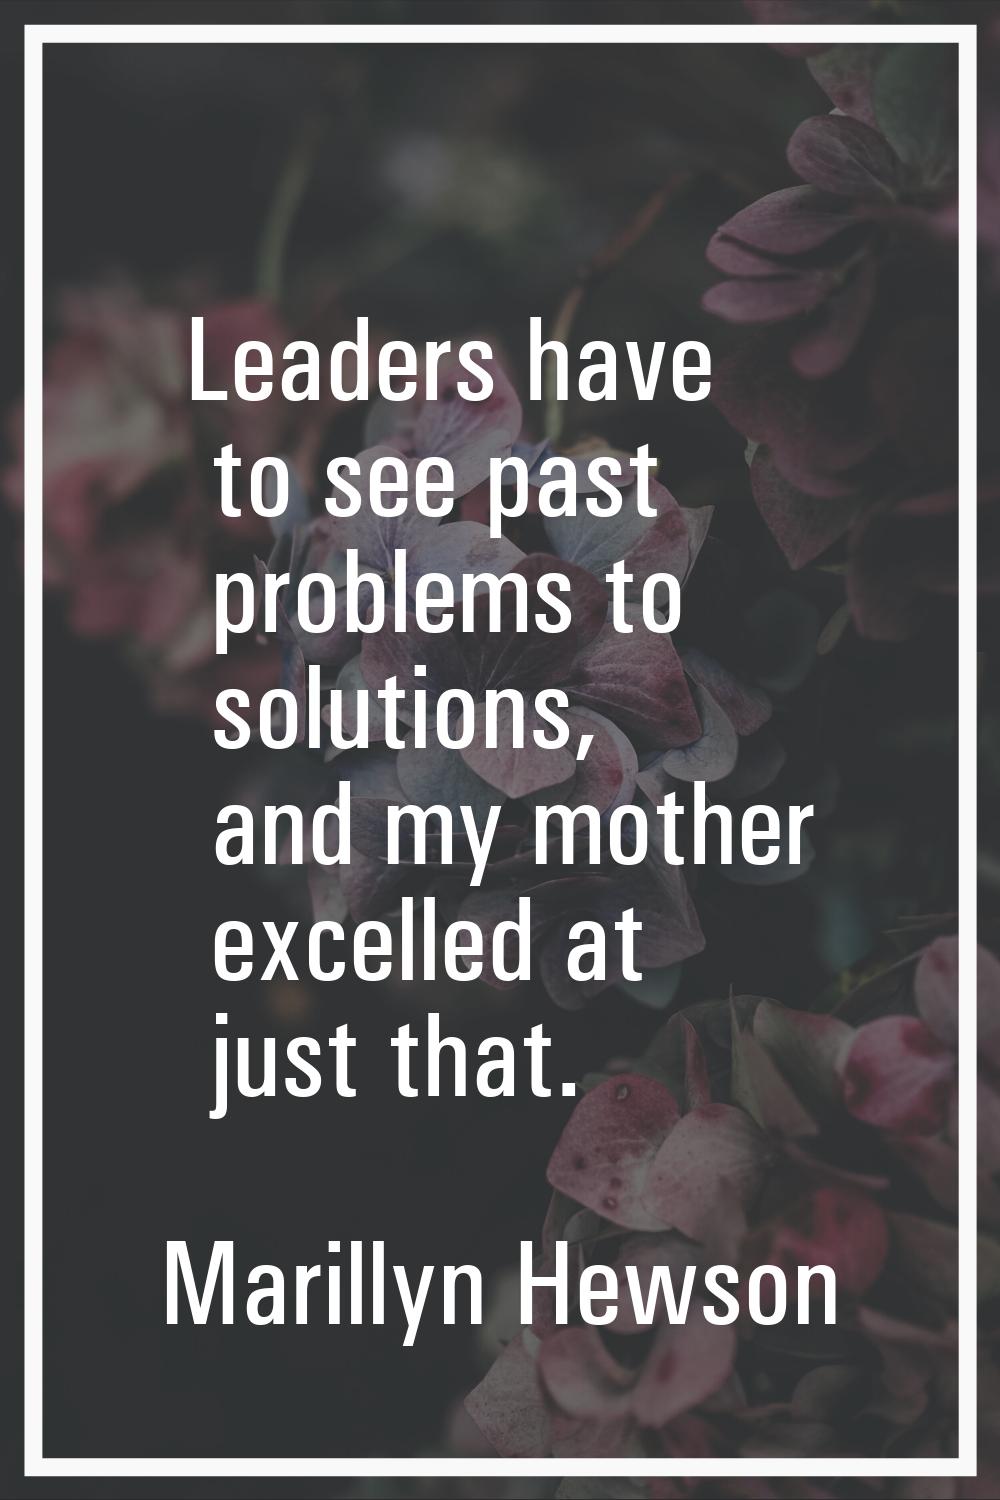 Leaders have to see past problems to solutions, and my mother excelled at just that.